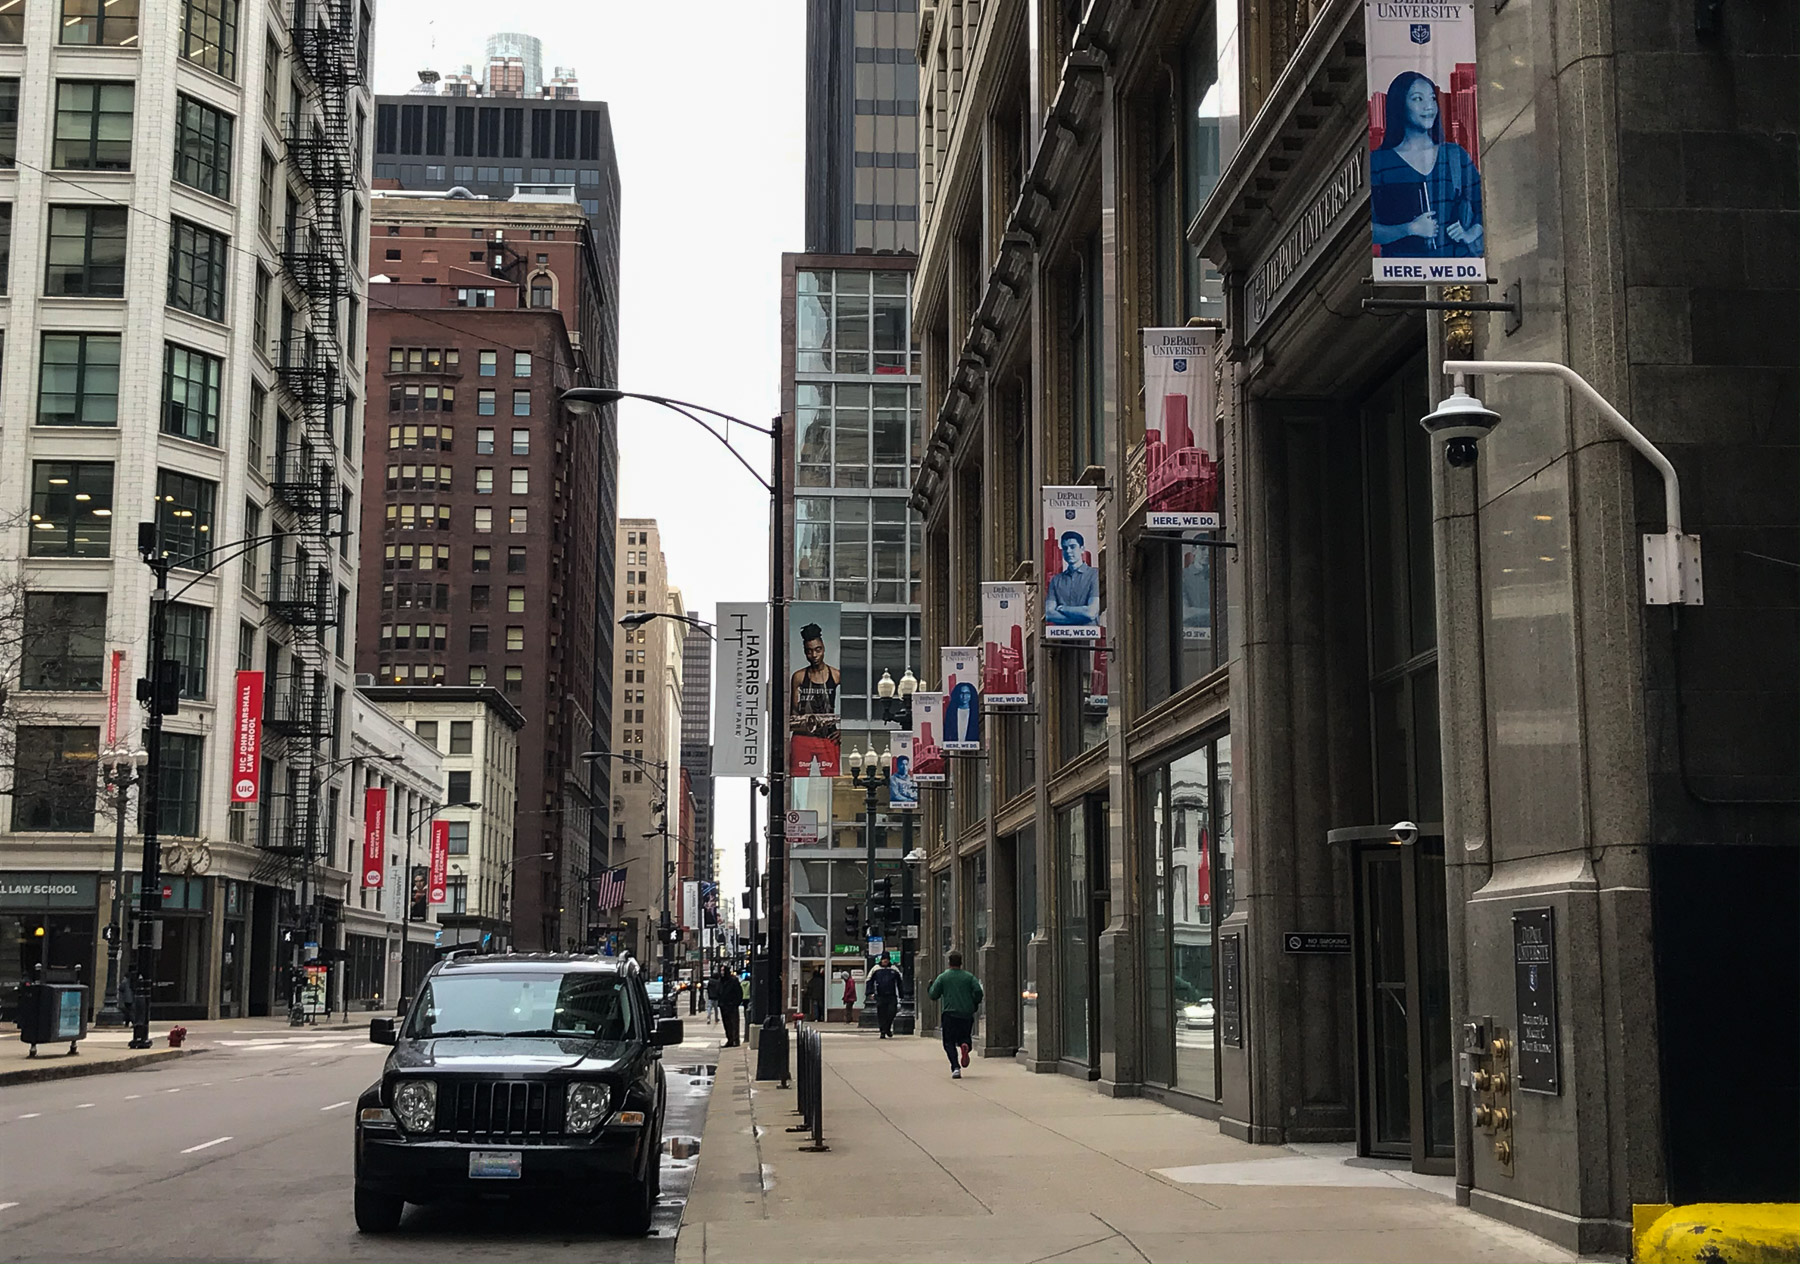 With quiet streets and a dry Chicago afternoon, joggers were able to get a daily run on the sidewalks of Jackson Blvd. (DePaul University/Randall Spriggs)